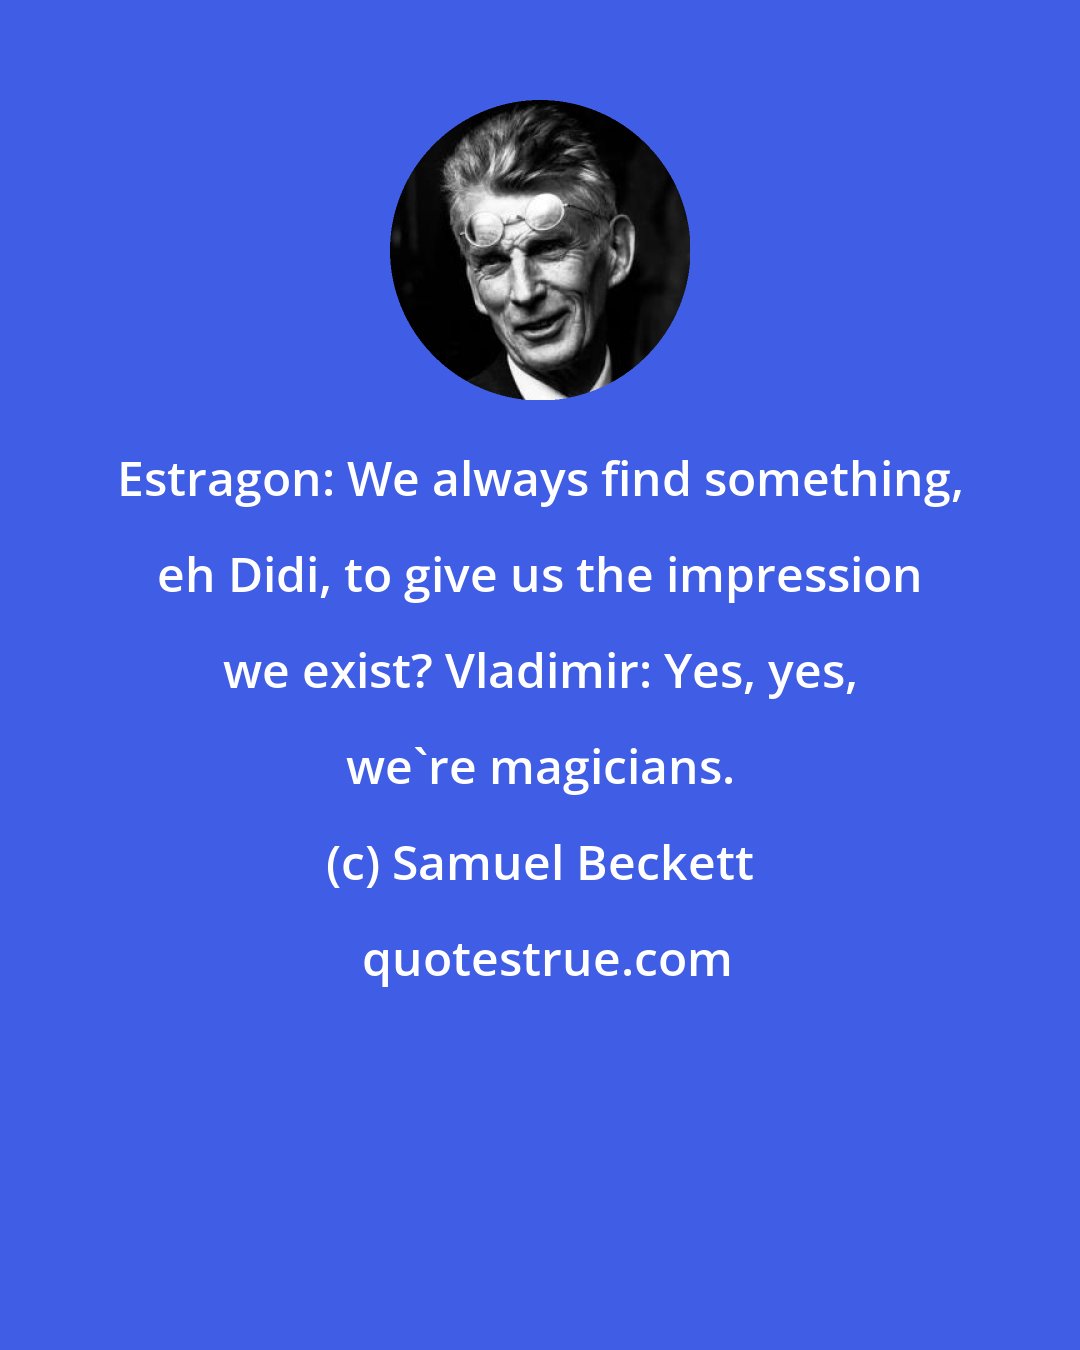 Samuel Beckett: Estragon: We always find something, eh Didi, to give us the impression we exist? Vladimir: Yes, yes, we're magicians.